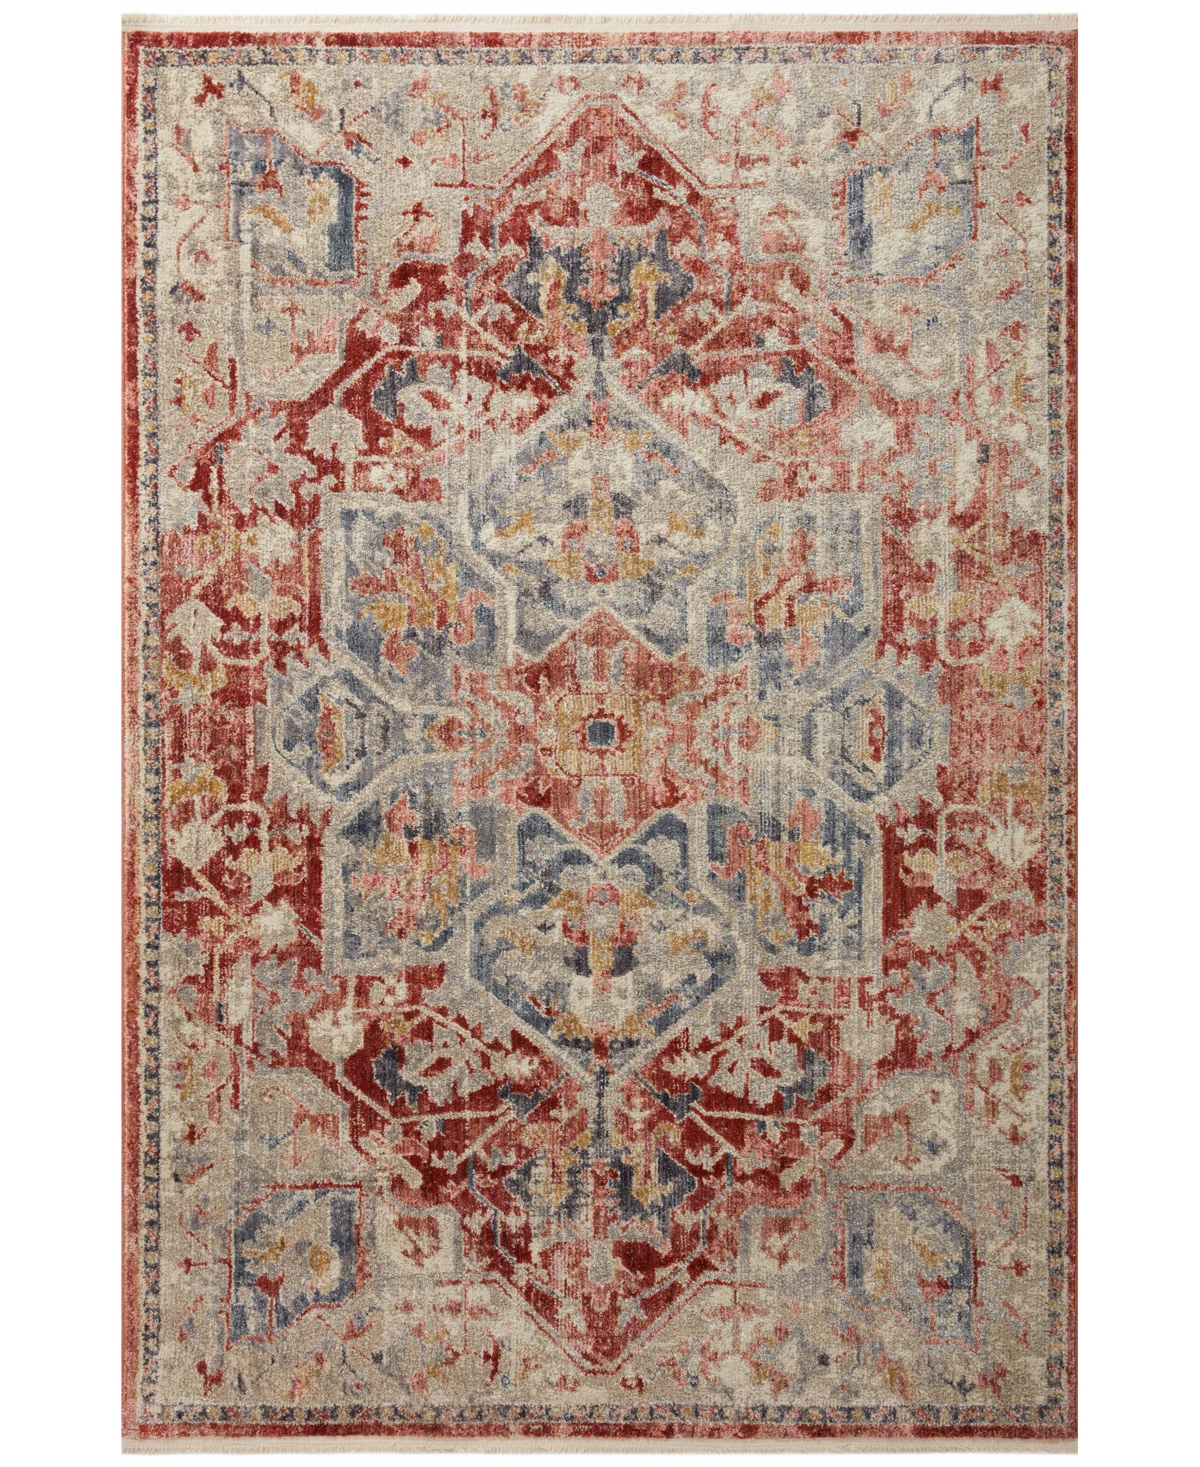 Magnolia Home By Joanna Gaines X Loloi Janey Jay-01 2'7" X 4' Area Rug In Maroon